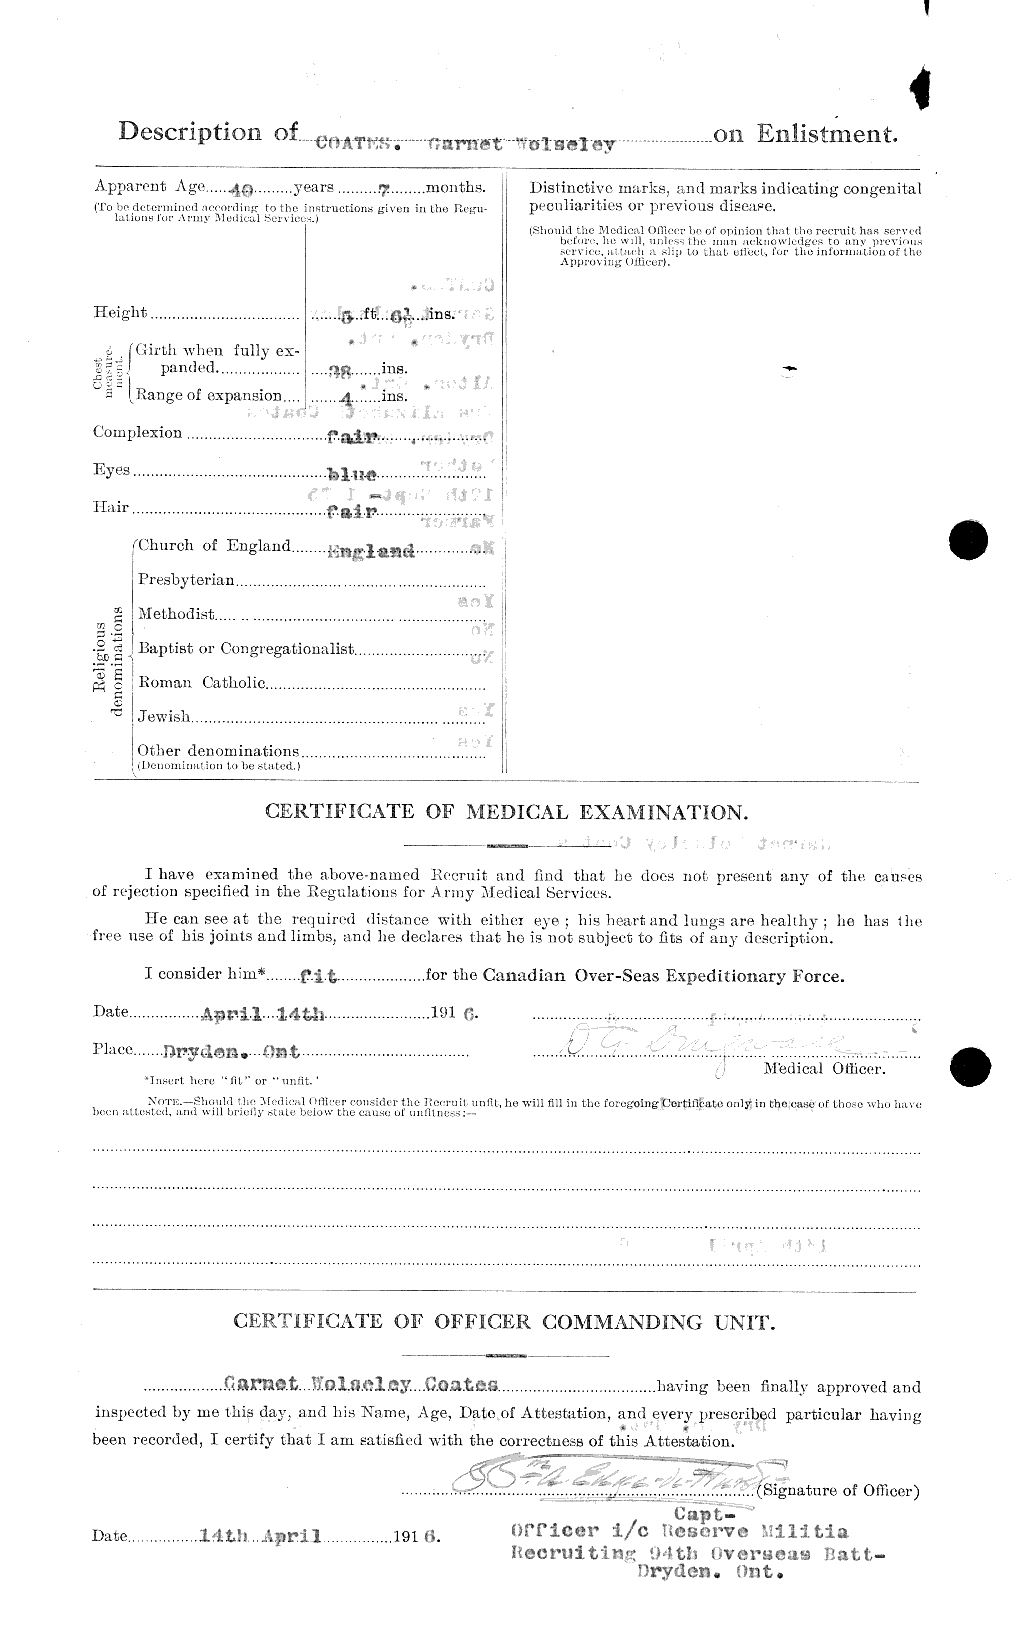 Personnel Records of the First World War - CEF 025629b